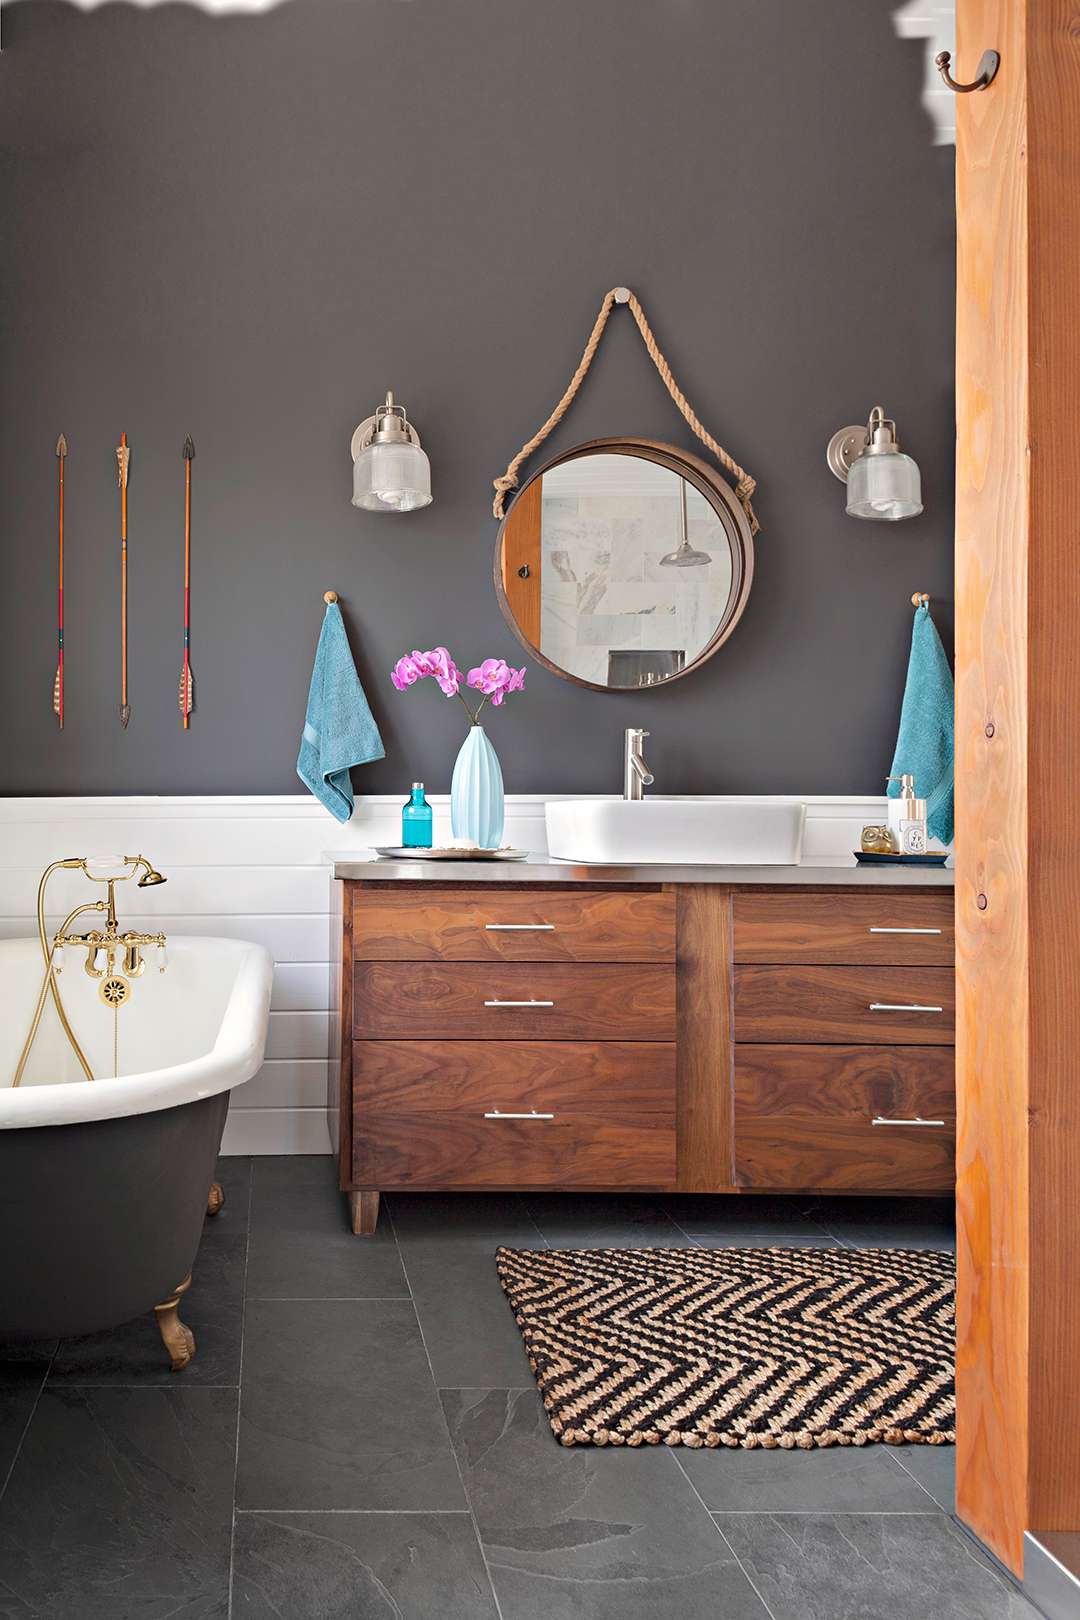 12 Popular Bathroom Paint Colors Our Editors Swear By Better Homes Gardens